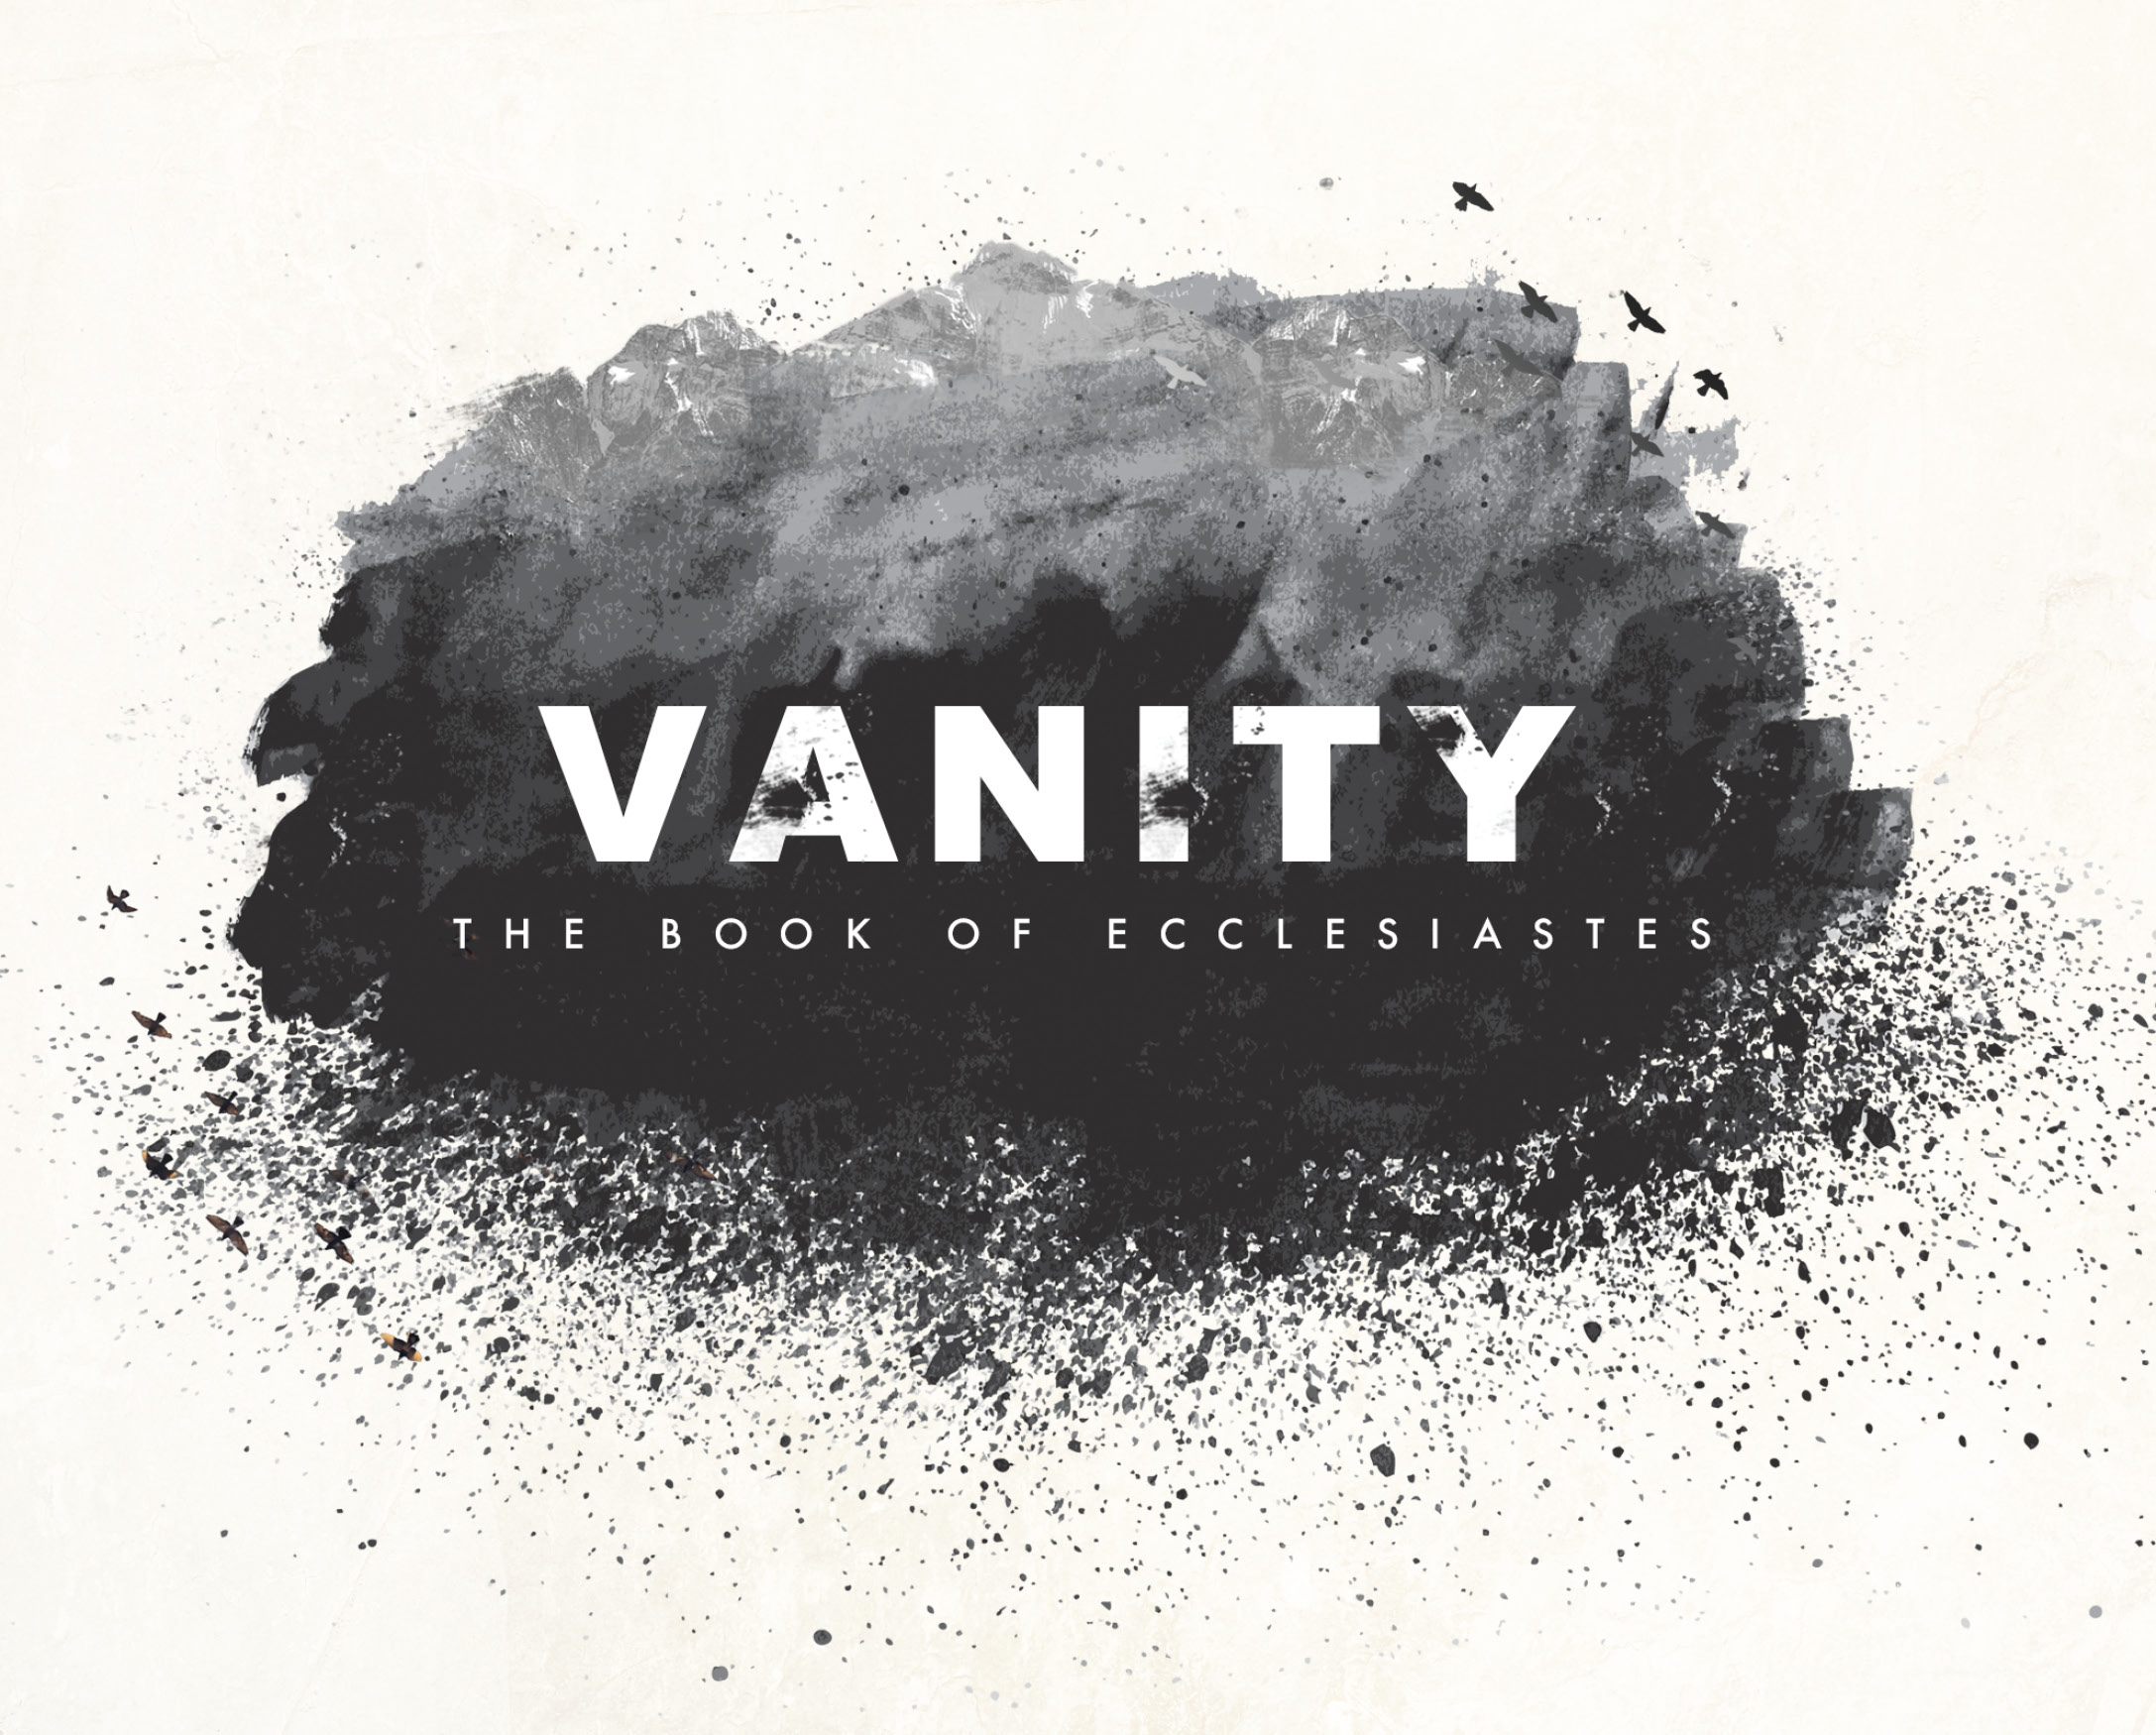 Vanity: Beautiful in its Time